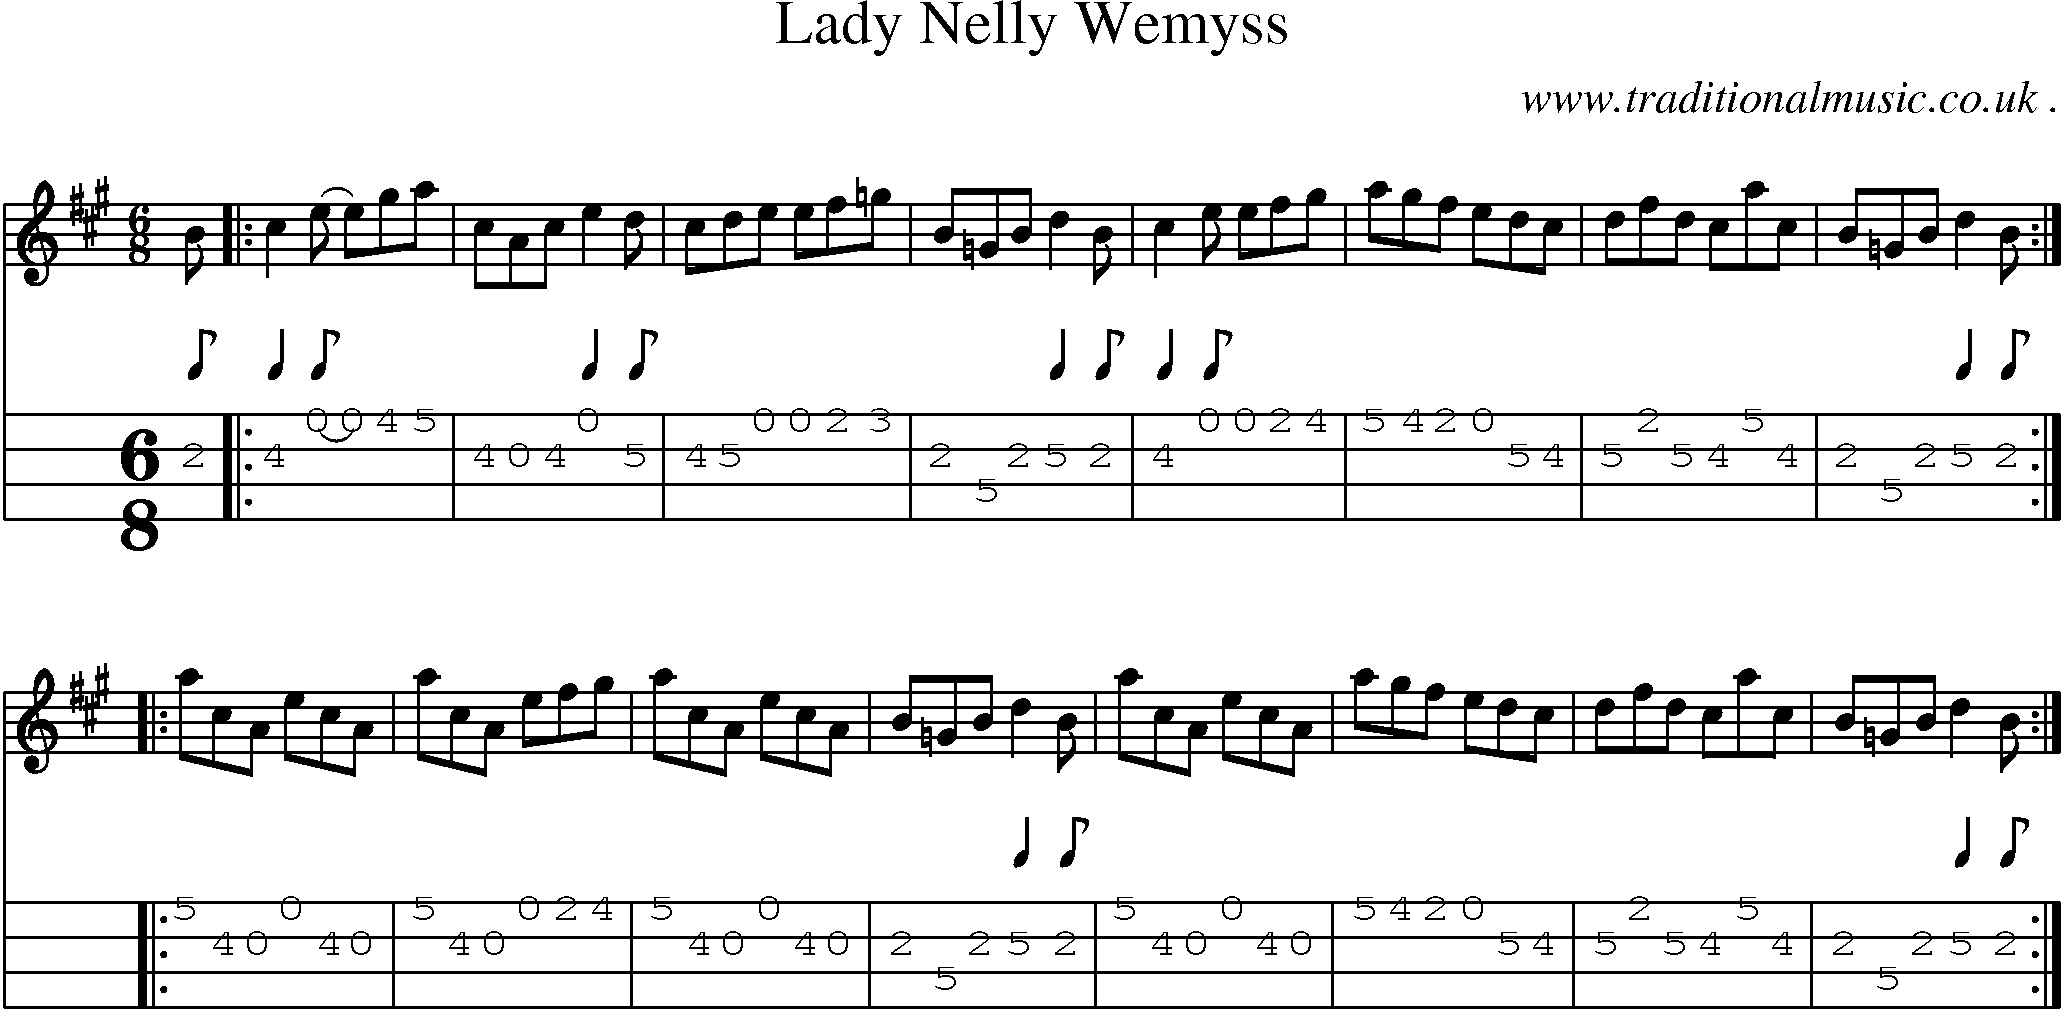 Sheet-music  score, Chords and Mandolin Tabs for Lady Nelly Wemyss